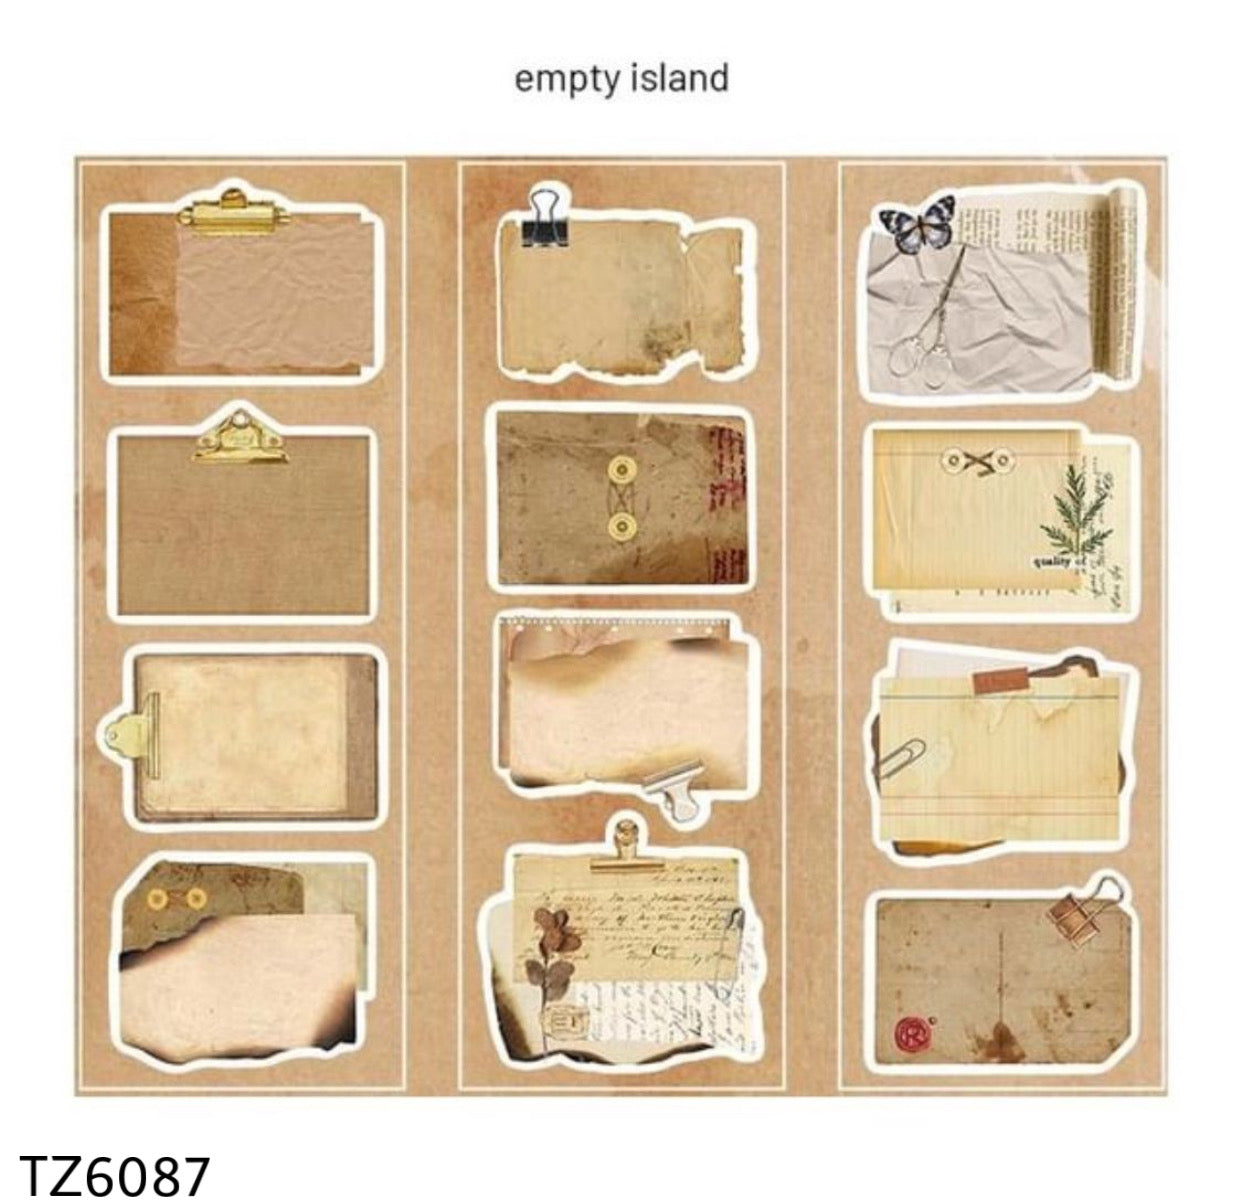 PB Kawai Journal Stickers for Decorate and Organize Journal